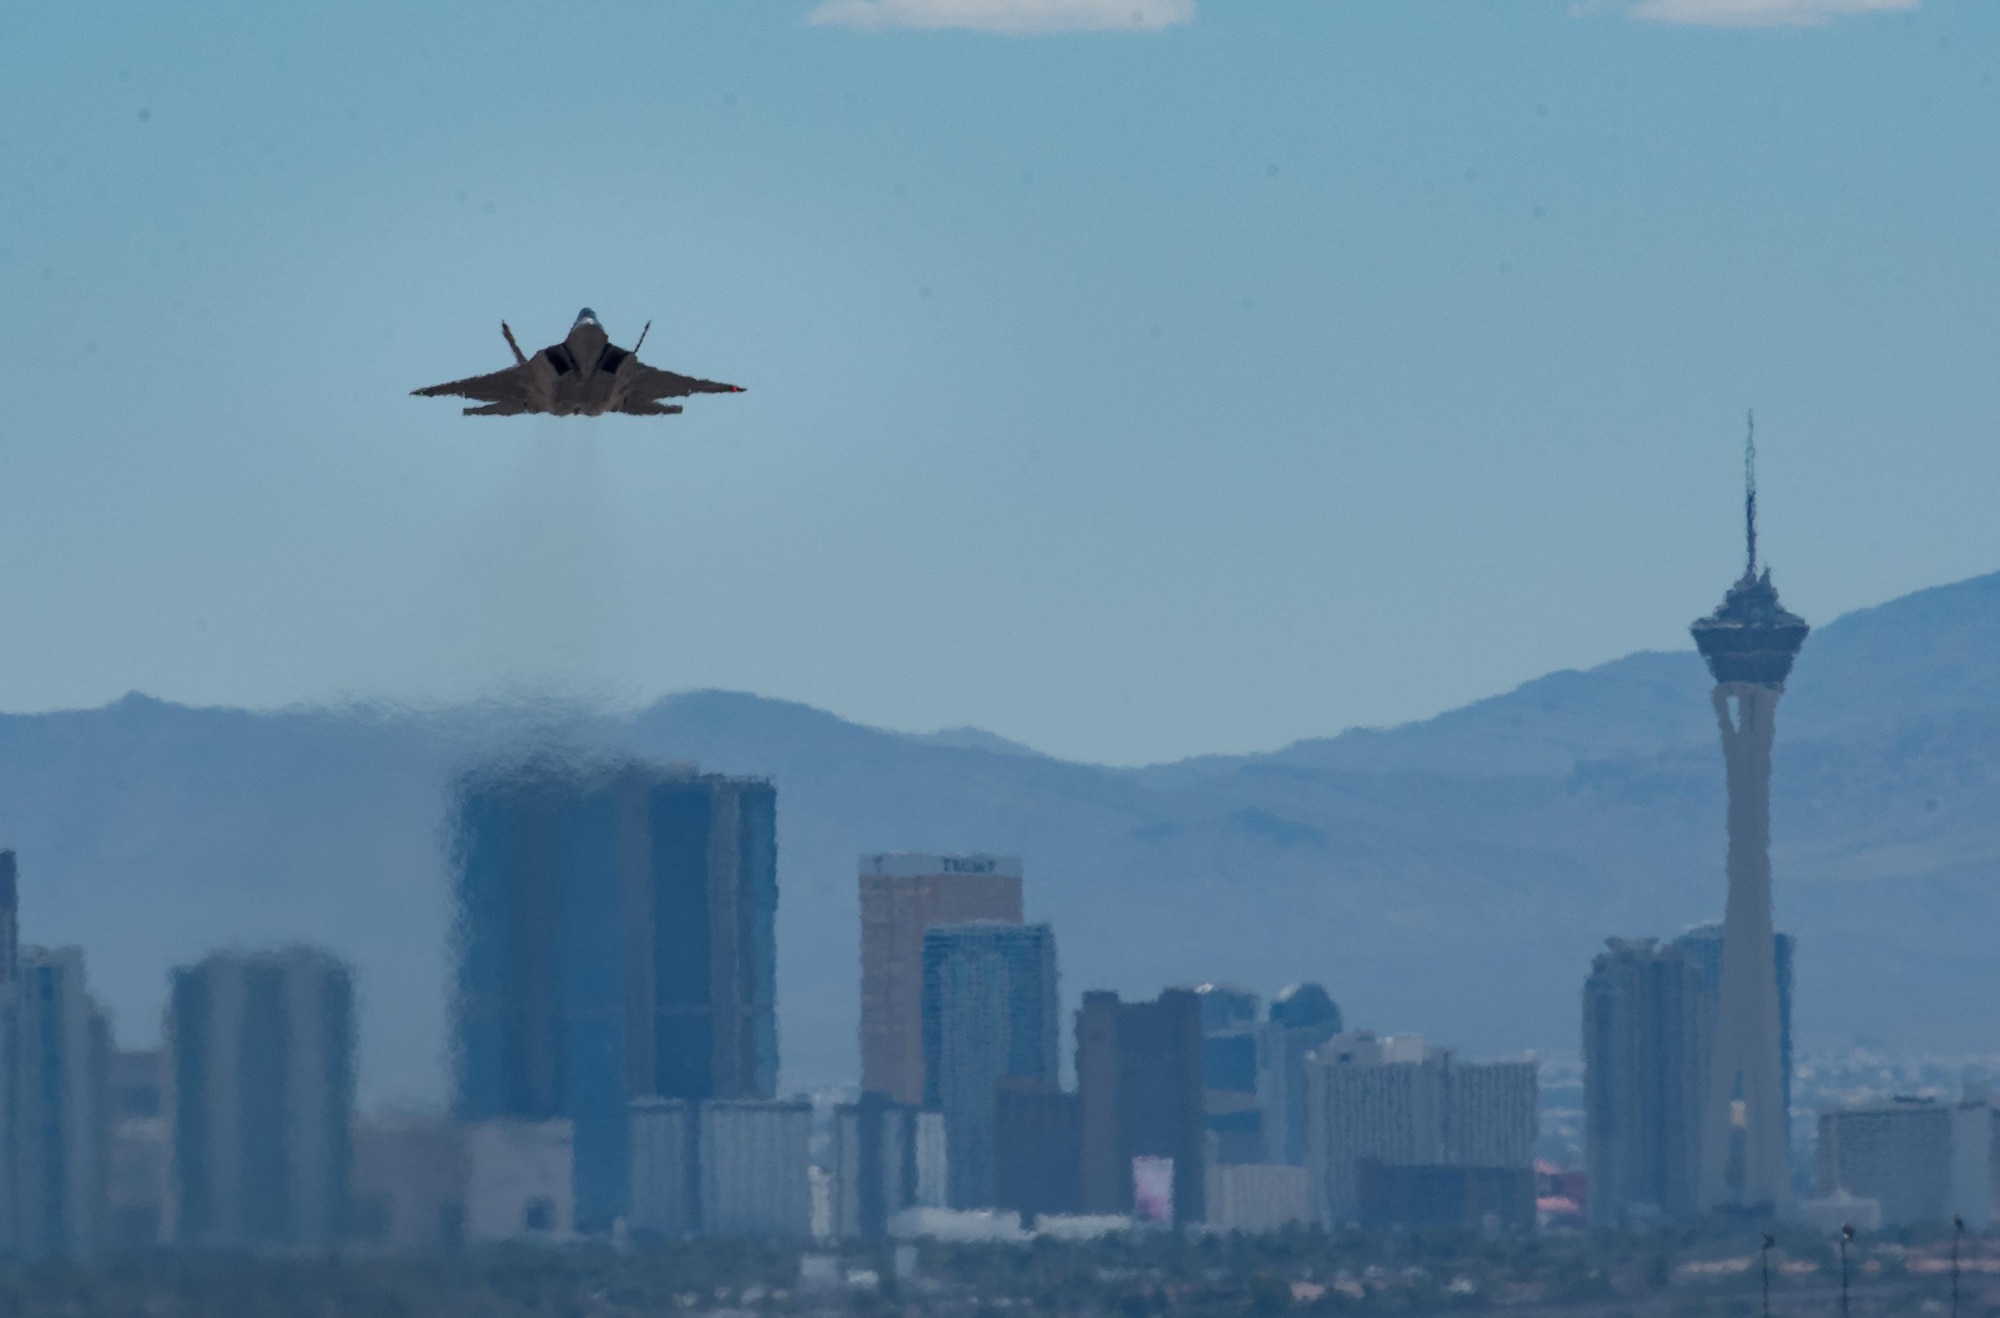 An 94th Fighter Squadron F-22 Raptor takes off with the Las Vegas, Nev. Skyline behind it during Red Flag 17-4 at Nellis Air Force Base, Nev., Aug. 17, 2017.  (U.S. Air Force photo by Staff Sgt. Carlin Leslie)